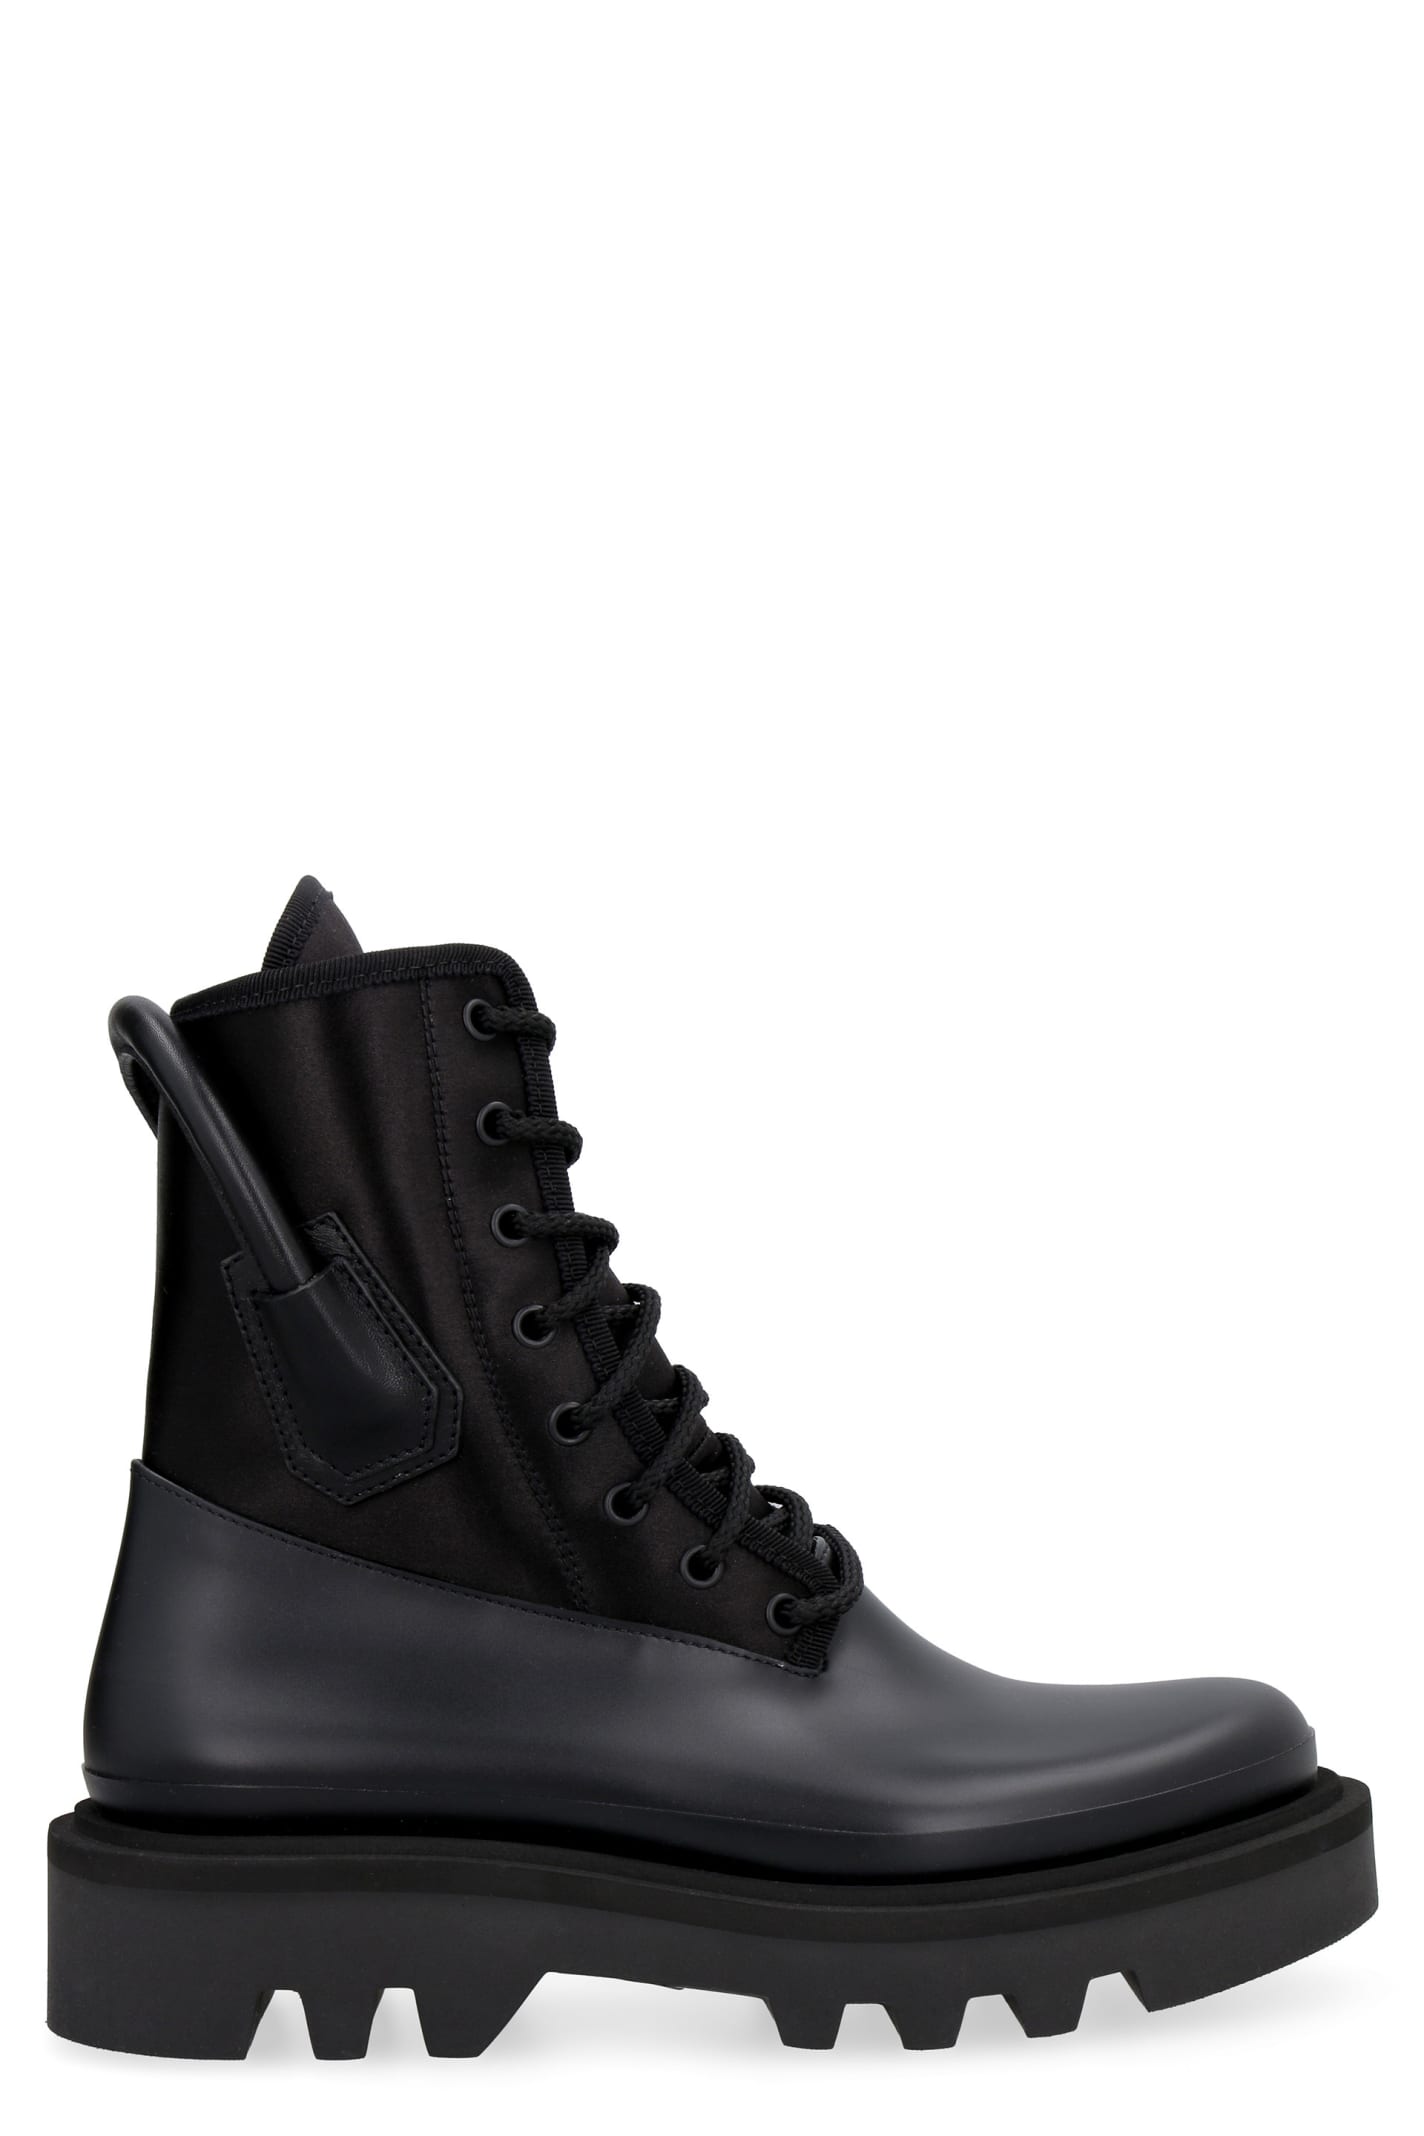 Buy Givenchy Lug-sole Lace-up Boots online, shop Givenchy shoes with free shipping